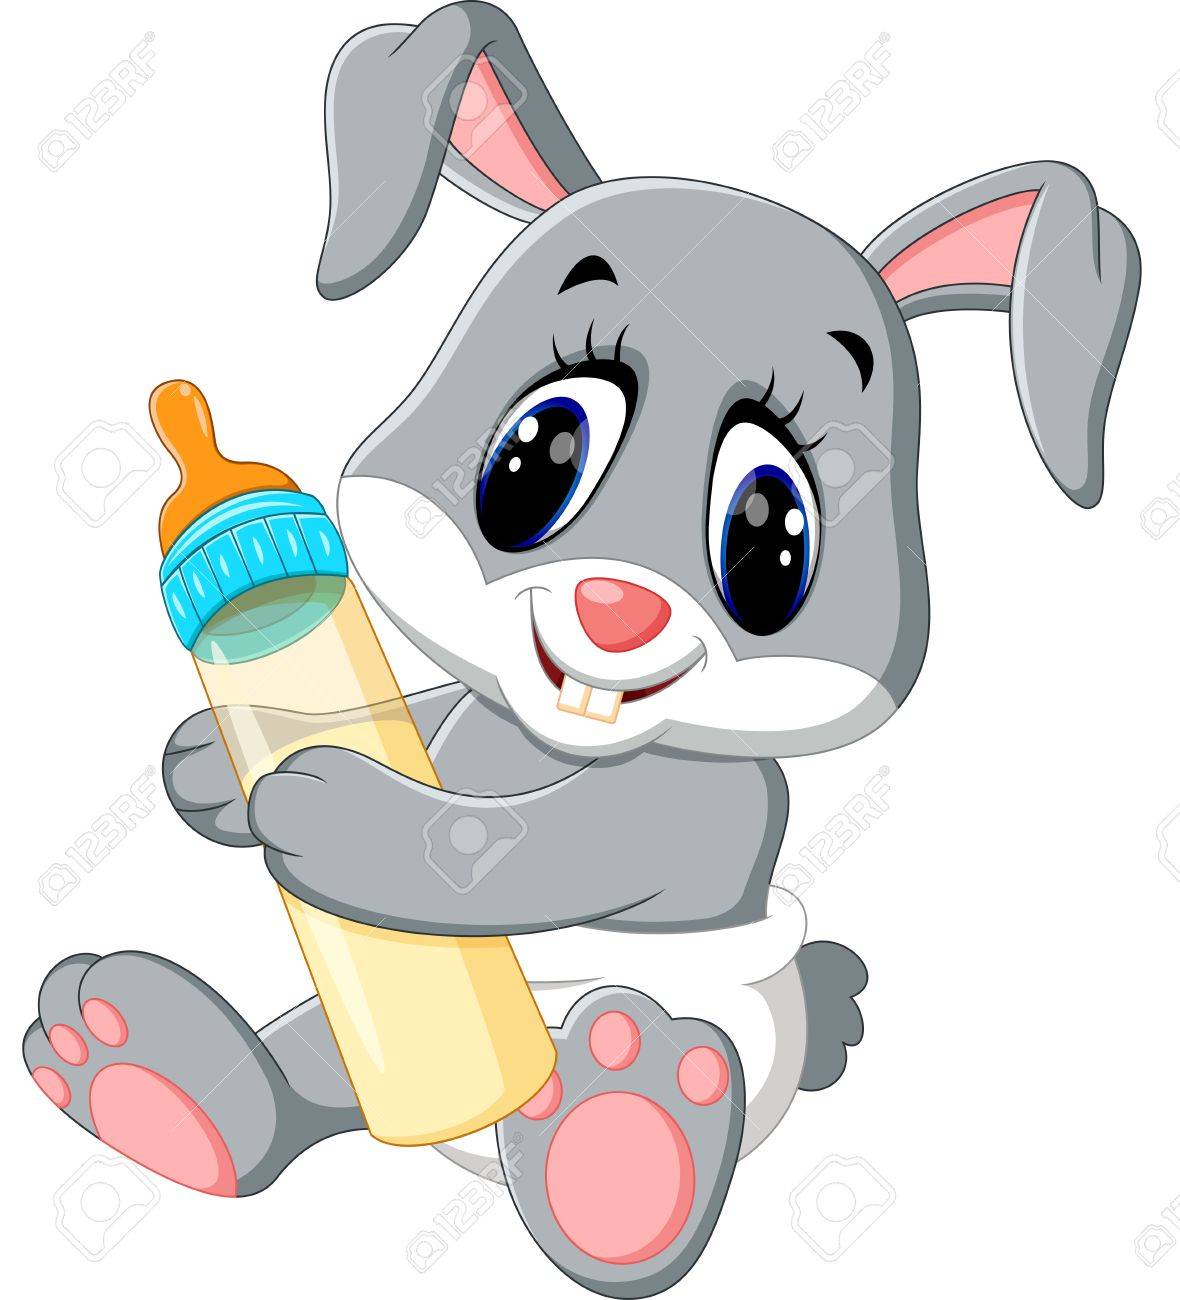 Baby bunny clipart 4 » Clipart Station.